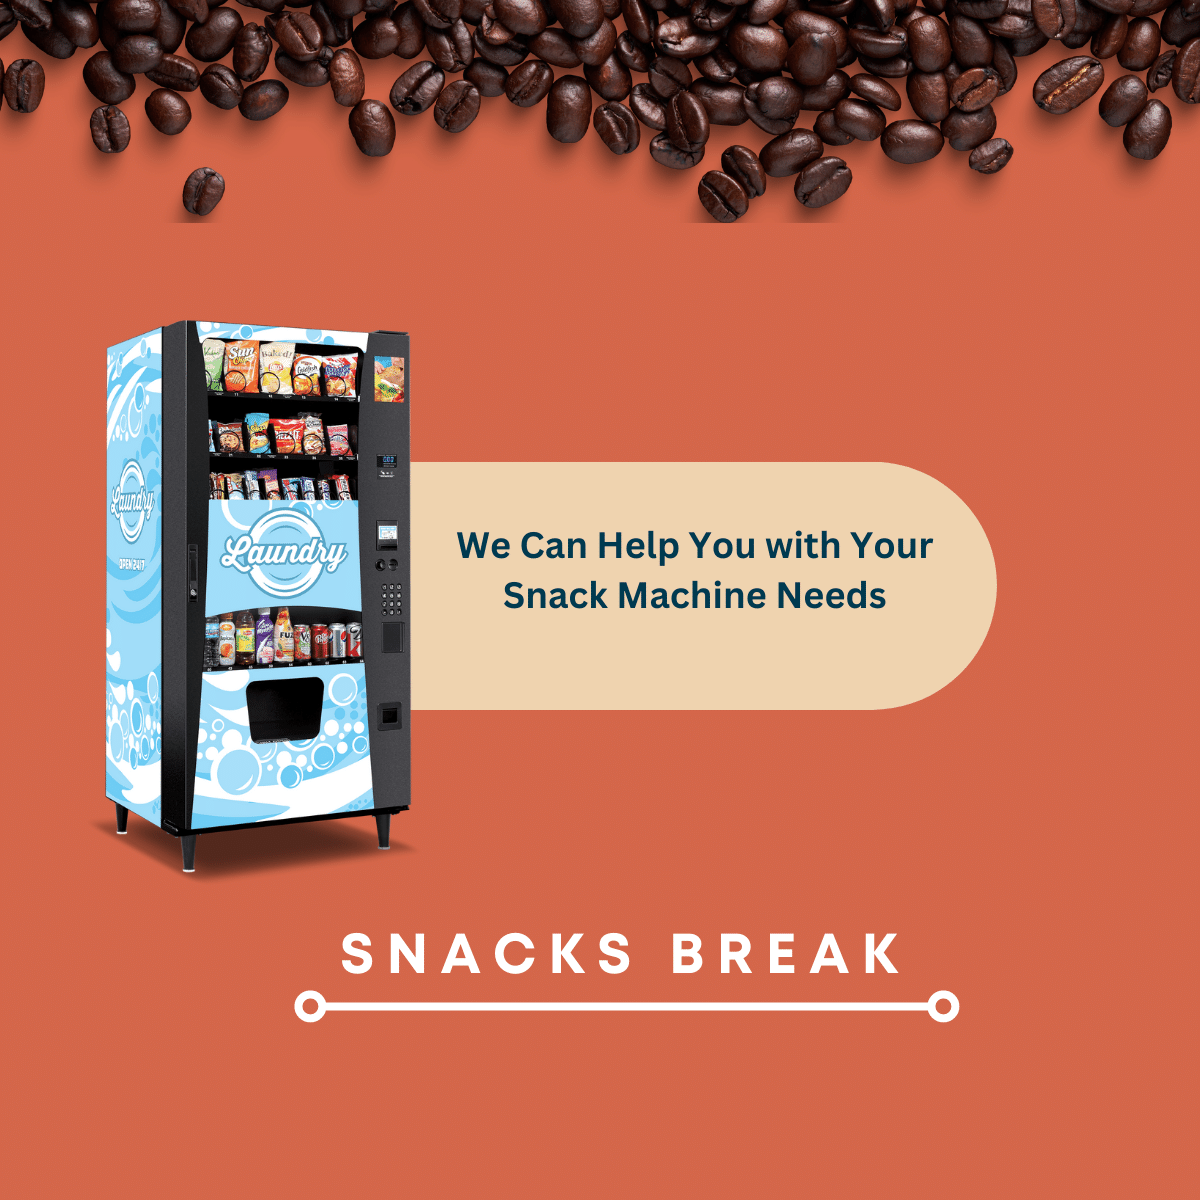 DO YOUR EMPLOYEES WANT A SNACK MACHINE?